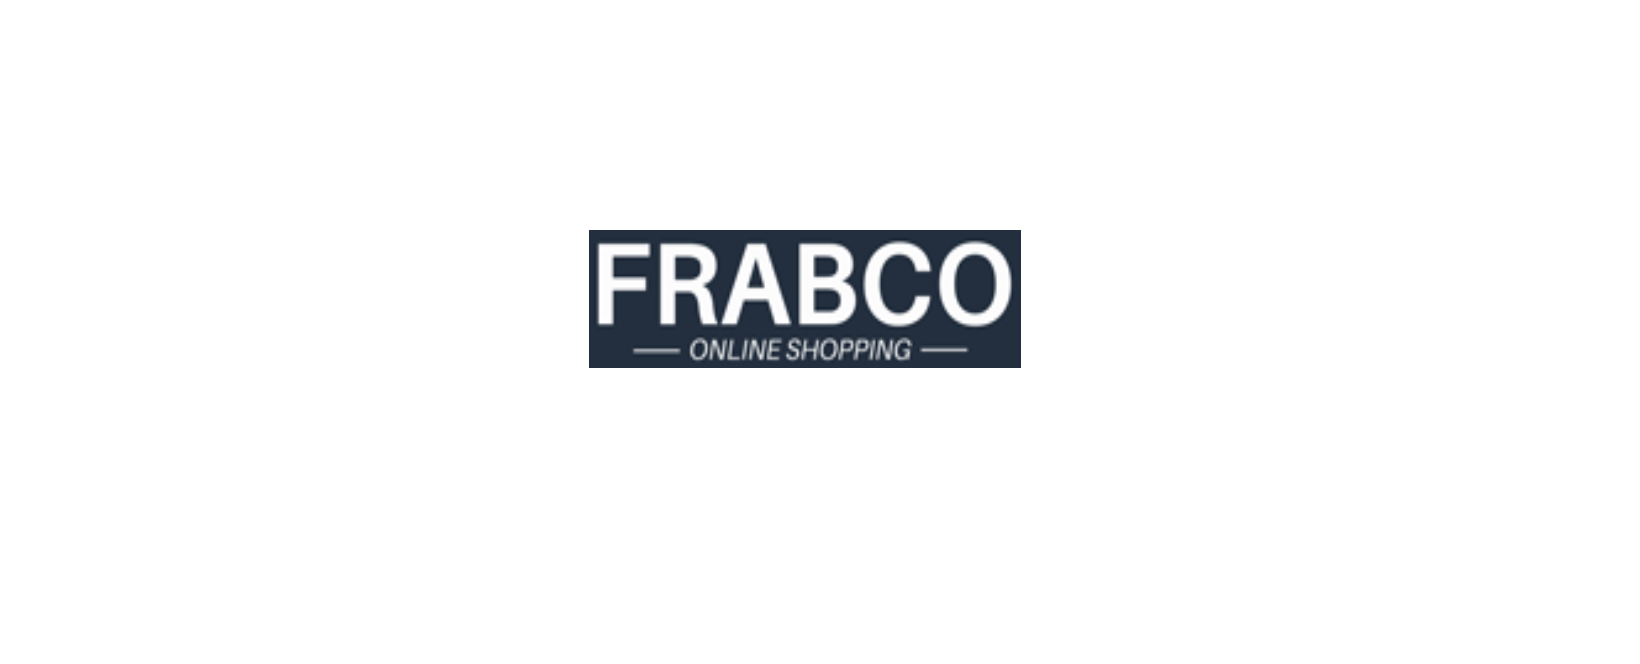 Frabco Discount Code 2023